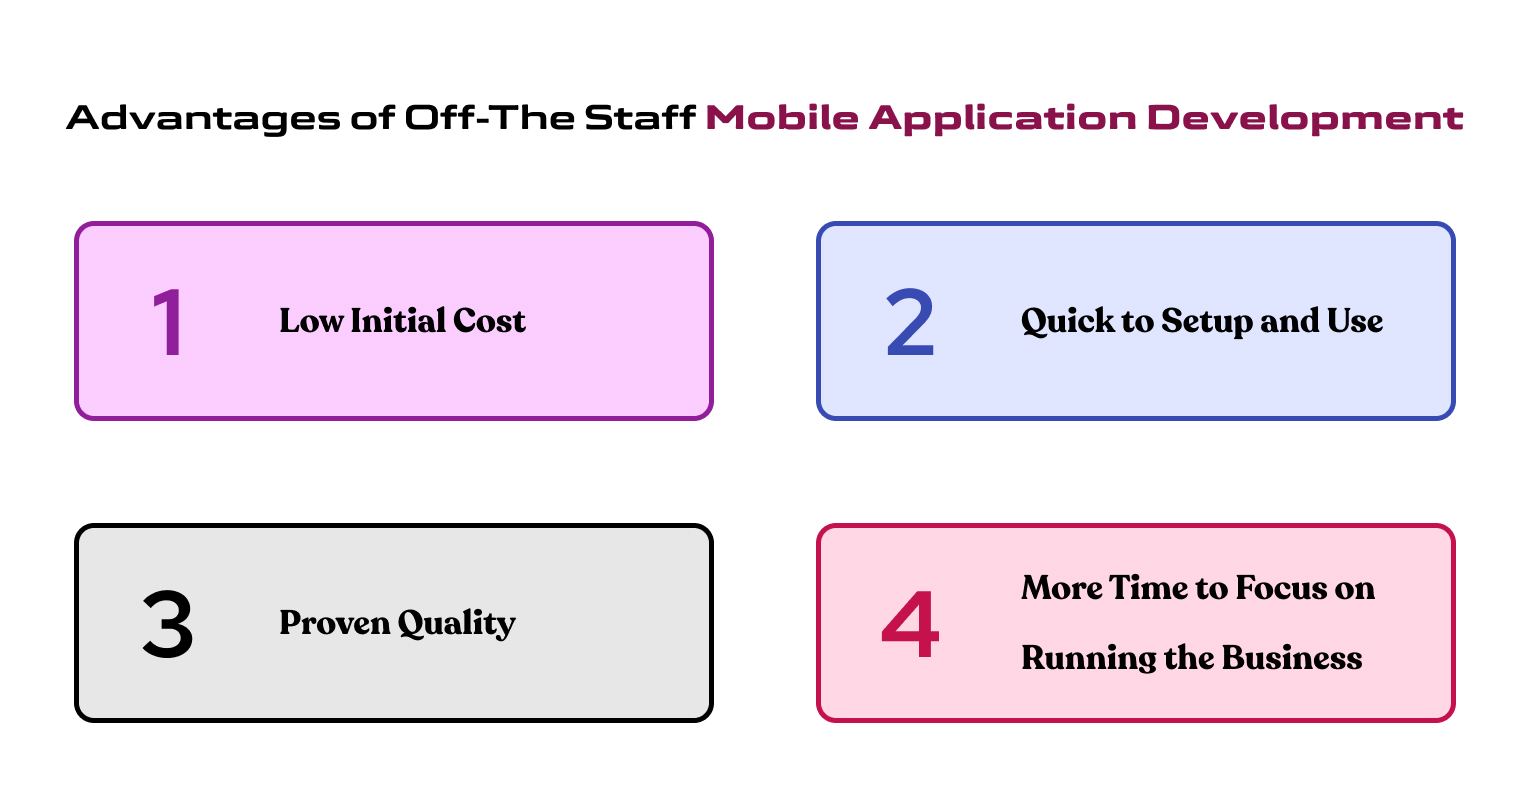 Advantages of Off-The Staff Mobile Application Development